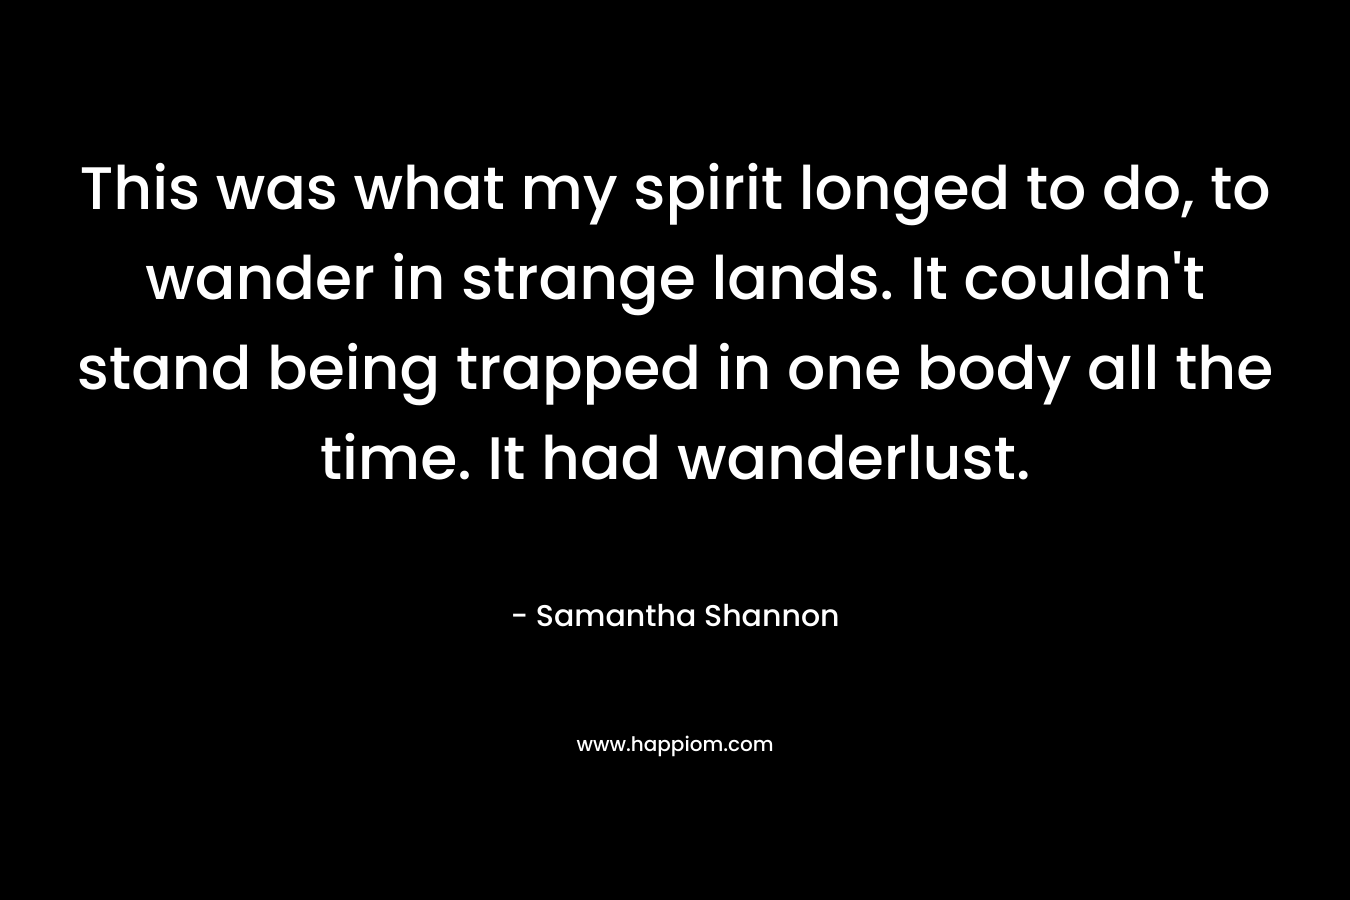 This was what my spirit longed to do, to wander in strange lands. It couldn't stand being trapped in one body all the time. It had wanderlust.